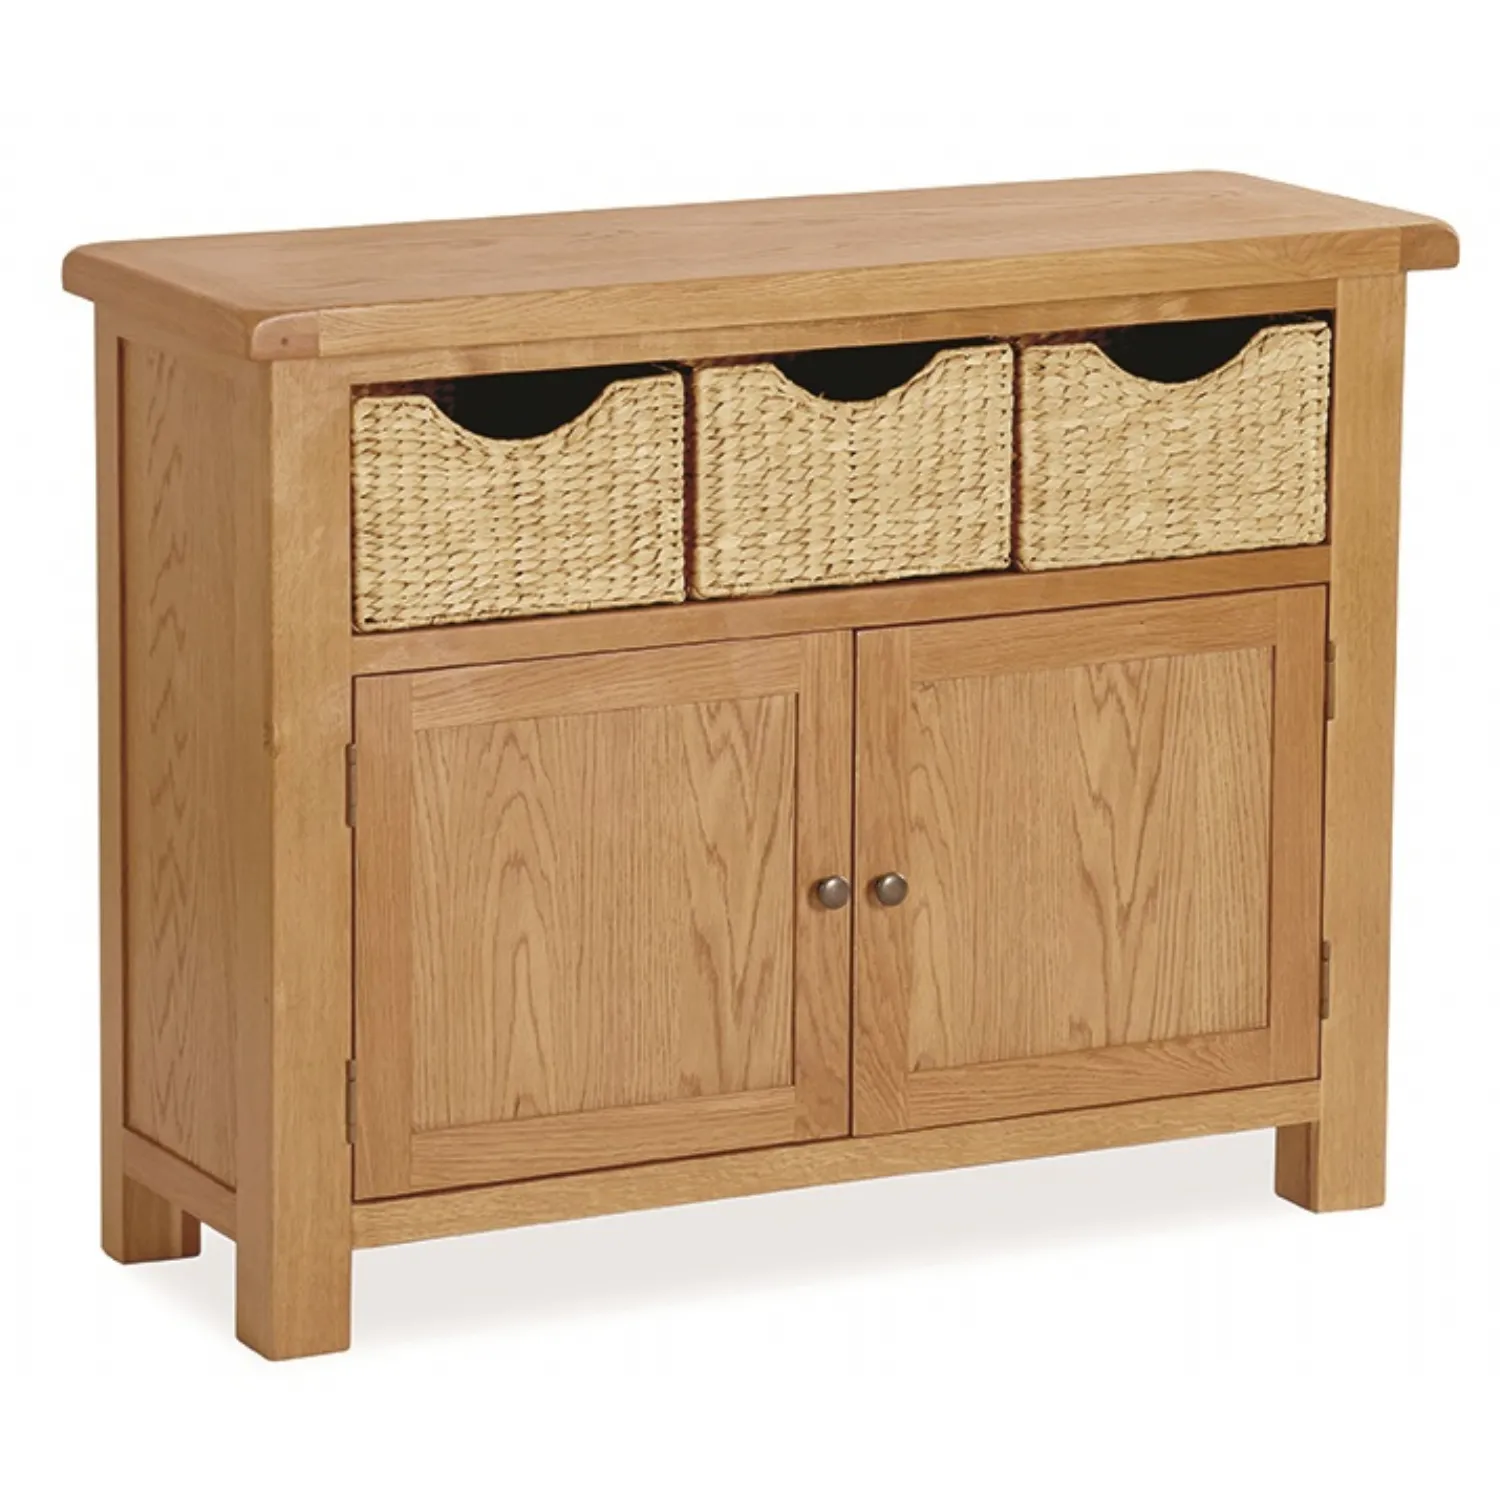 Rustic Solid Oak Small Sideboard with 3 Baskets